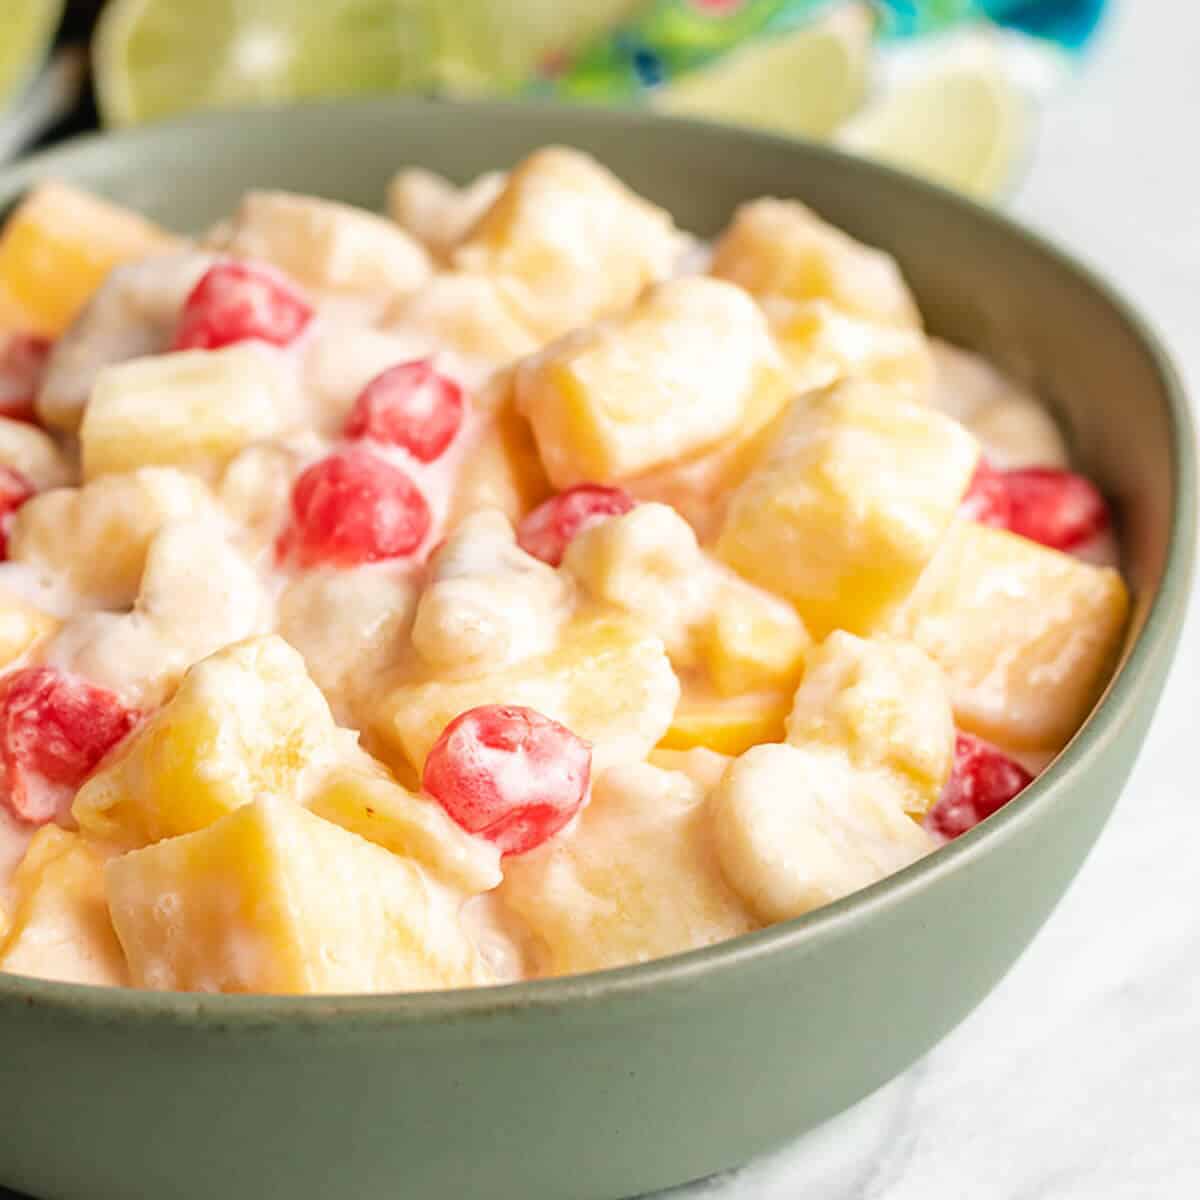 The tropical fruit salad with coconut served in a green bowl.